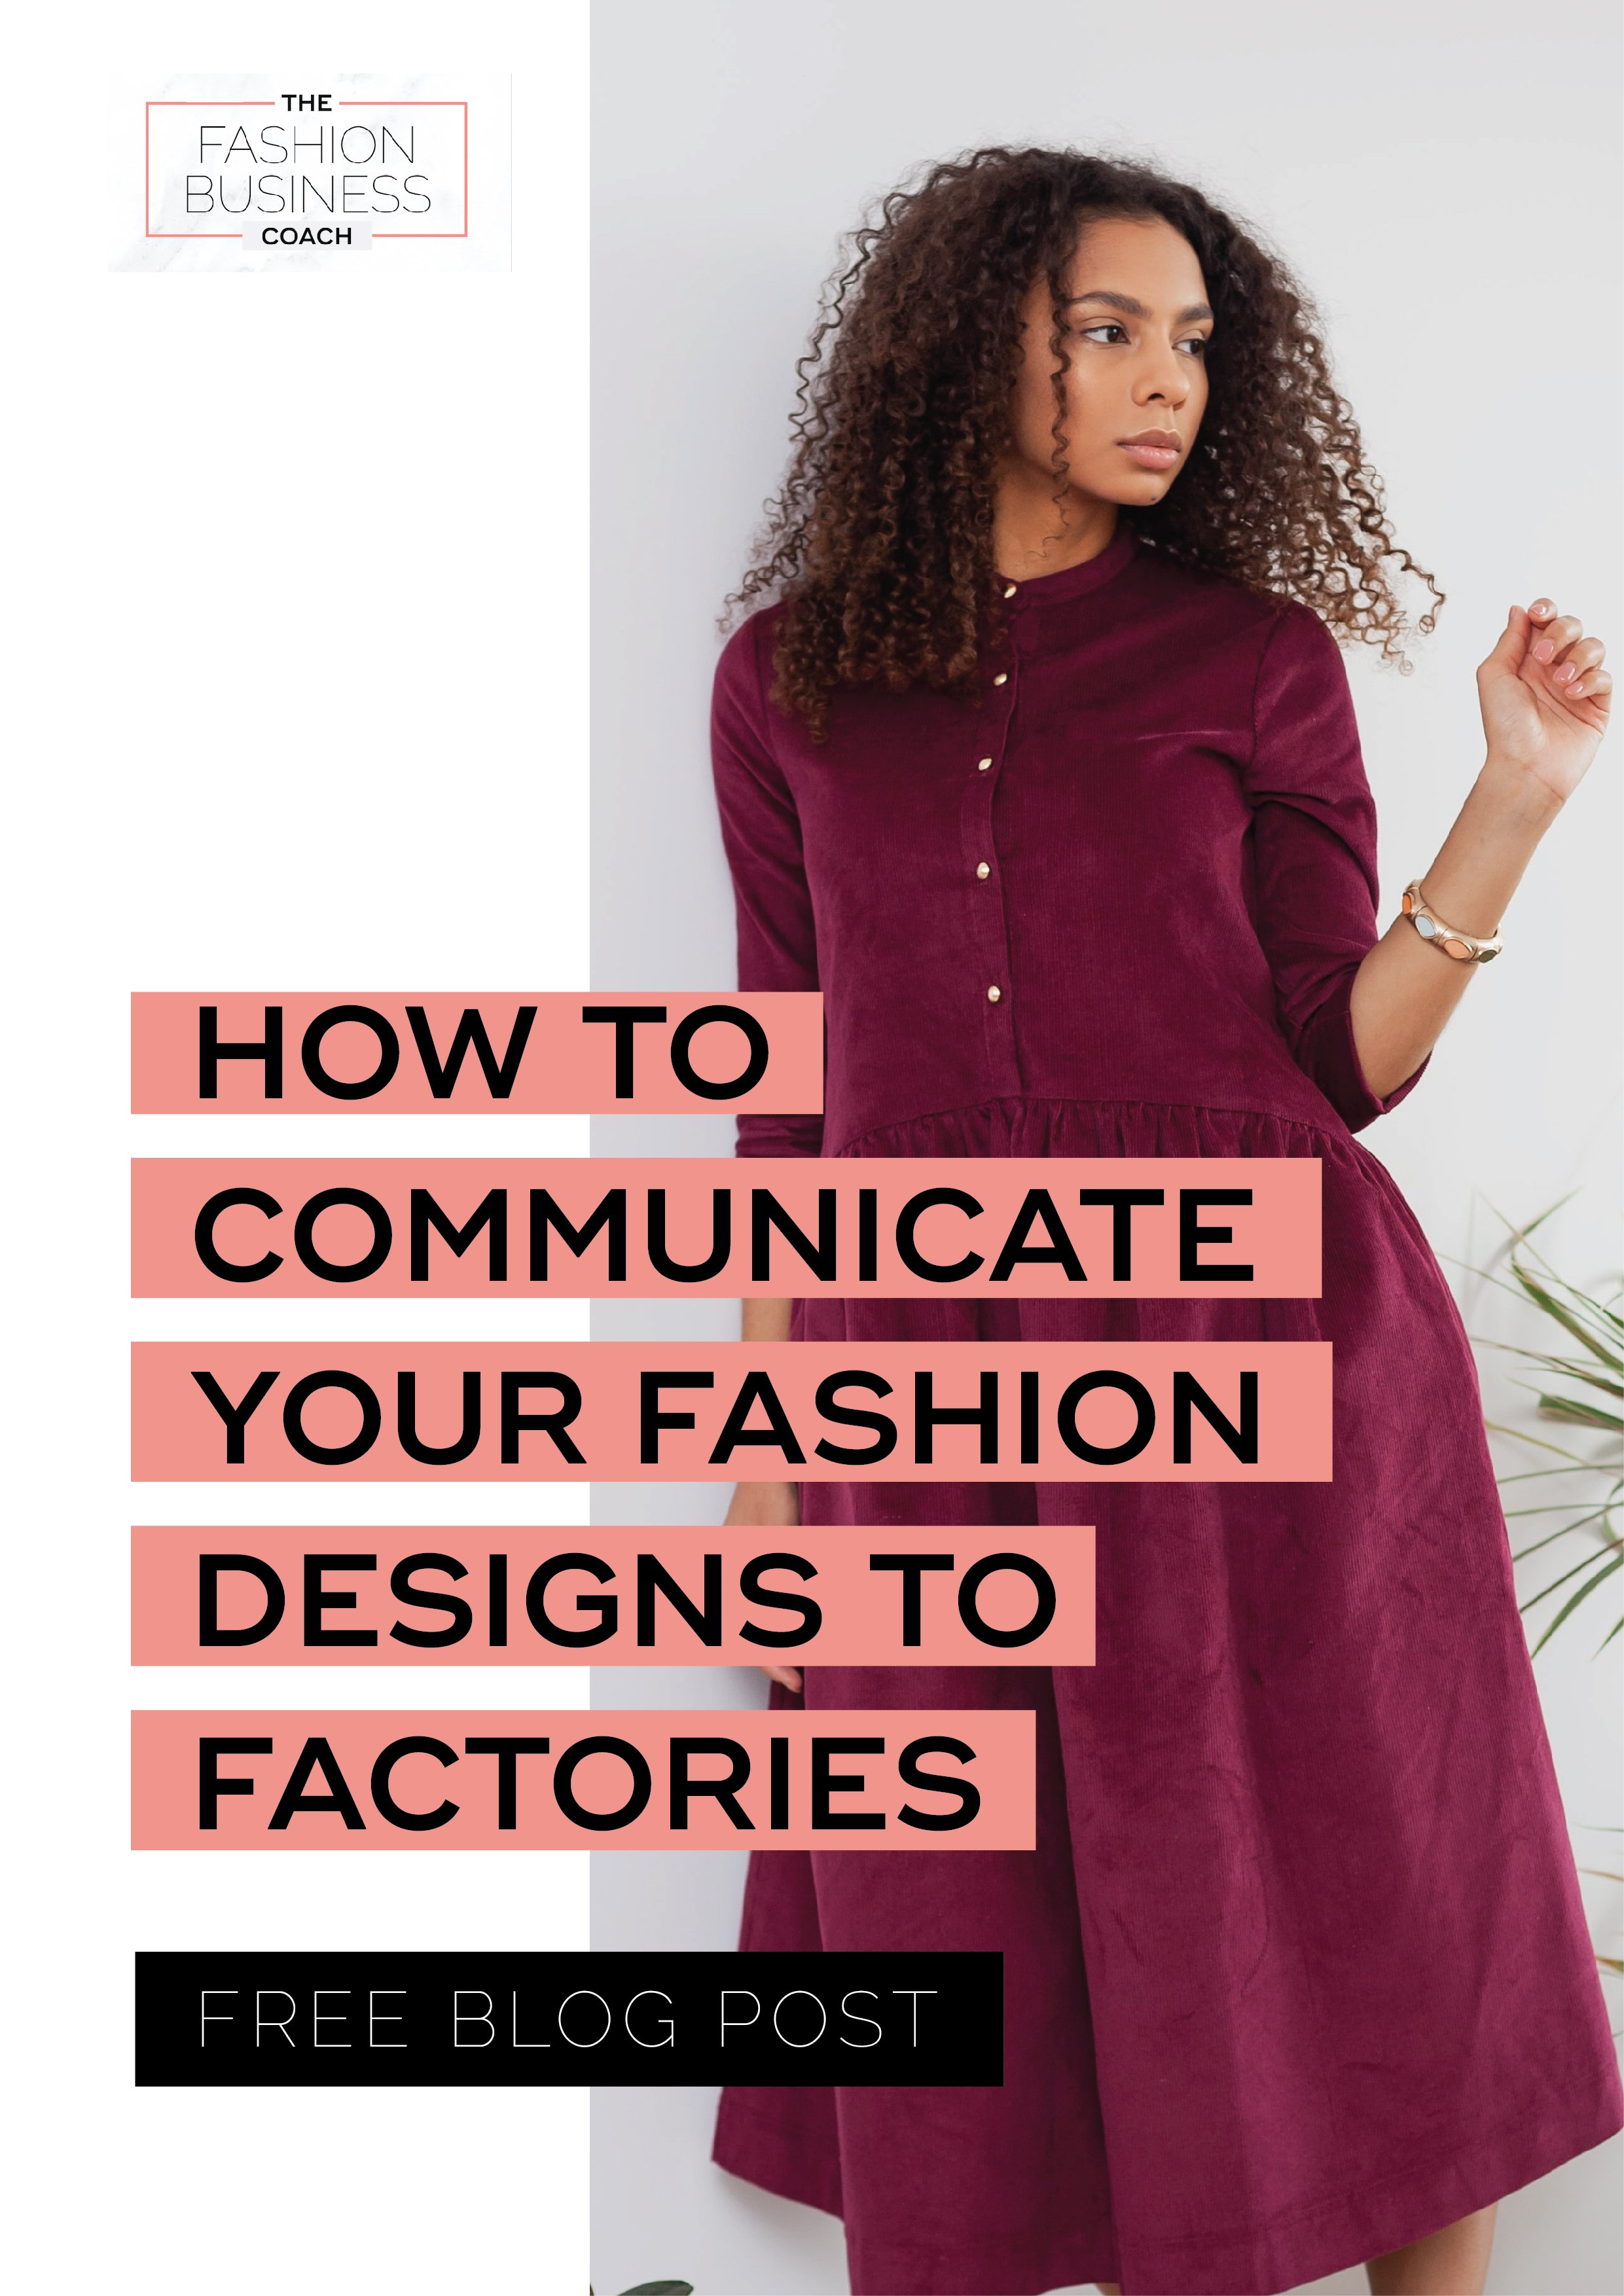 How to Communicate Your Fashion Designs to Factories 2.jpg